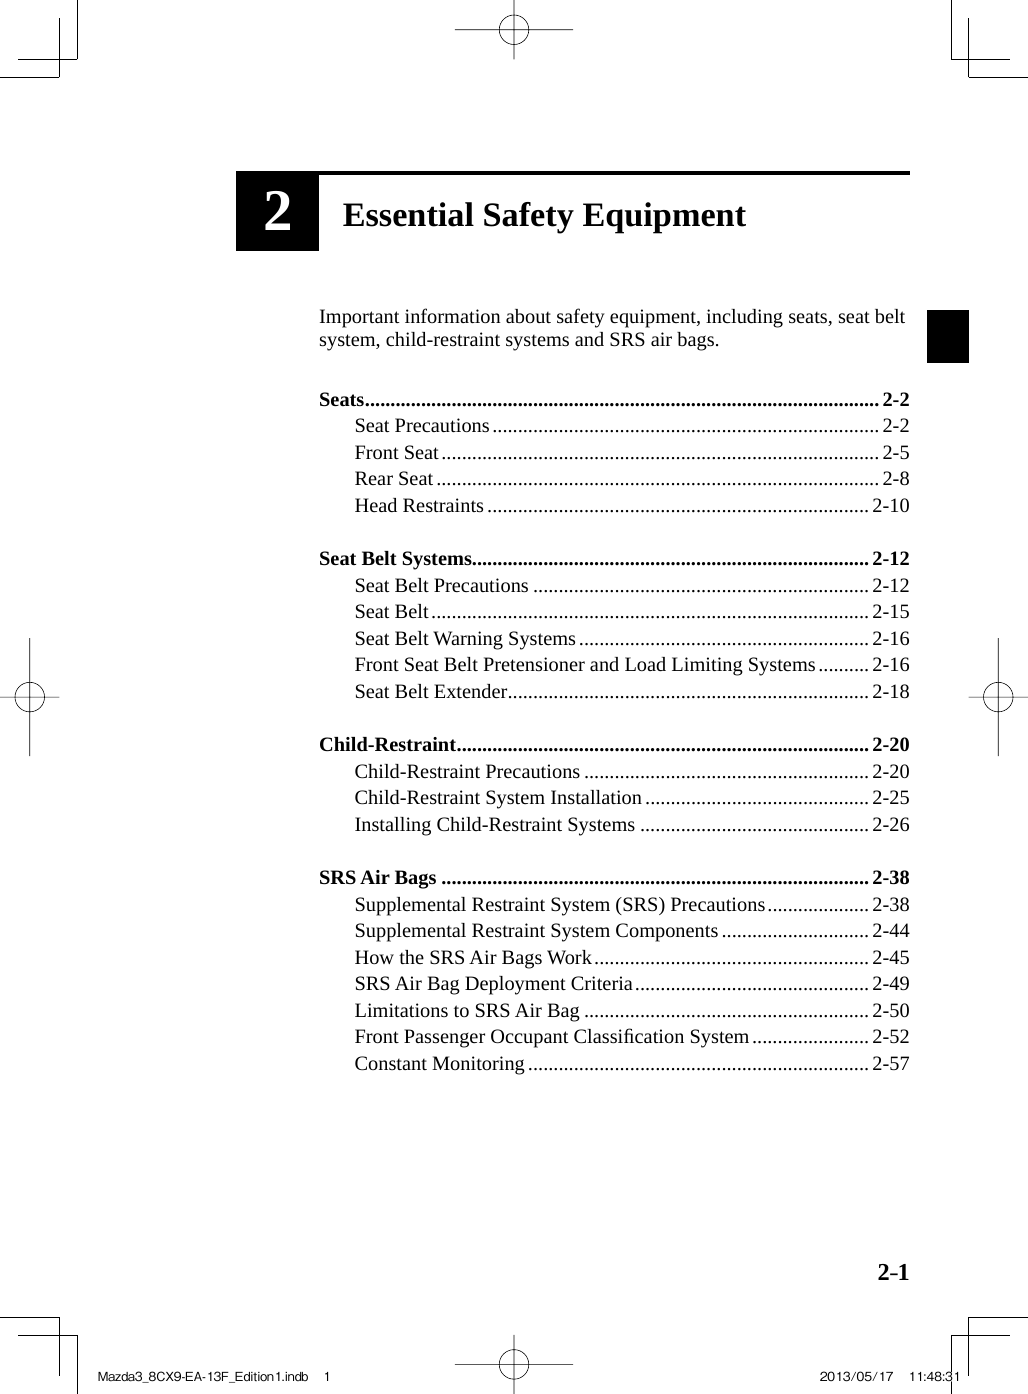 2–12Essential Safety Equipment  Important information about safety equipment, including seats, seat beltsystem, child-restraint systems and SRS air bags.     Seats ..................................................................................................... 2-2   Seat  Precautions ............................................................................  2-2   Front  Seat ......................................................................................  2-5   Rear  Seat  ....................................................................................... 2-8   Head  Restraints  ........................................................................... 2-10     Seat  Belt  Systems ..............................................................................  2-12   Seat  Belt  Precautions  .................................................................. 2-12   Seat  Belt ......................................................................................  2-15   Seat  Belt  Warning  Systems ......................................................... 2-16   Front Seat Belt Pretensioner and Load Limiting Systems ..........  2-16   Seat  Belt  Extender ....................................................................... 2-18     Child-Restraint ................................................................................. 2-20   Child-Restraint  Precautions  ........................................................  2-20   Child-Restraint  System  Installation  ............................................ 2-25   Installing  Child-Restraint  Systems  .............................................  2-26     SRS  Air  Bags  .................................................................................... 2-38   Supplemental Restraint System (SRS) Precautions .................... 2-38   Supplemental Restraint System Components ............................. 2-44   How the SRS Air Bags Work ......................................................  2-45   SRS Air Bag Deployment Criteria .............................................. 2-49   Limitations to SRS Air Bag ........................................................  2-50   Front Passenger Occupant Classiﬁ cation System .......................  2-52   Constant  Monitoring  ................................................................... 2-57 Mazda3_8CX9-EA-13F_Edition1.indb   1Mazda3_8CX9-EA-13F_Edition1.indb   1 2013/05/17   11:48:312013/05/17   11:48:31